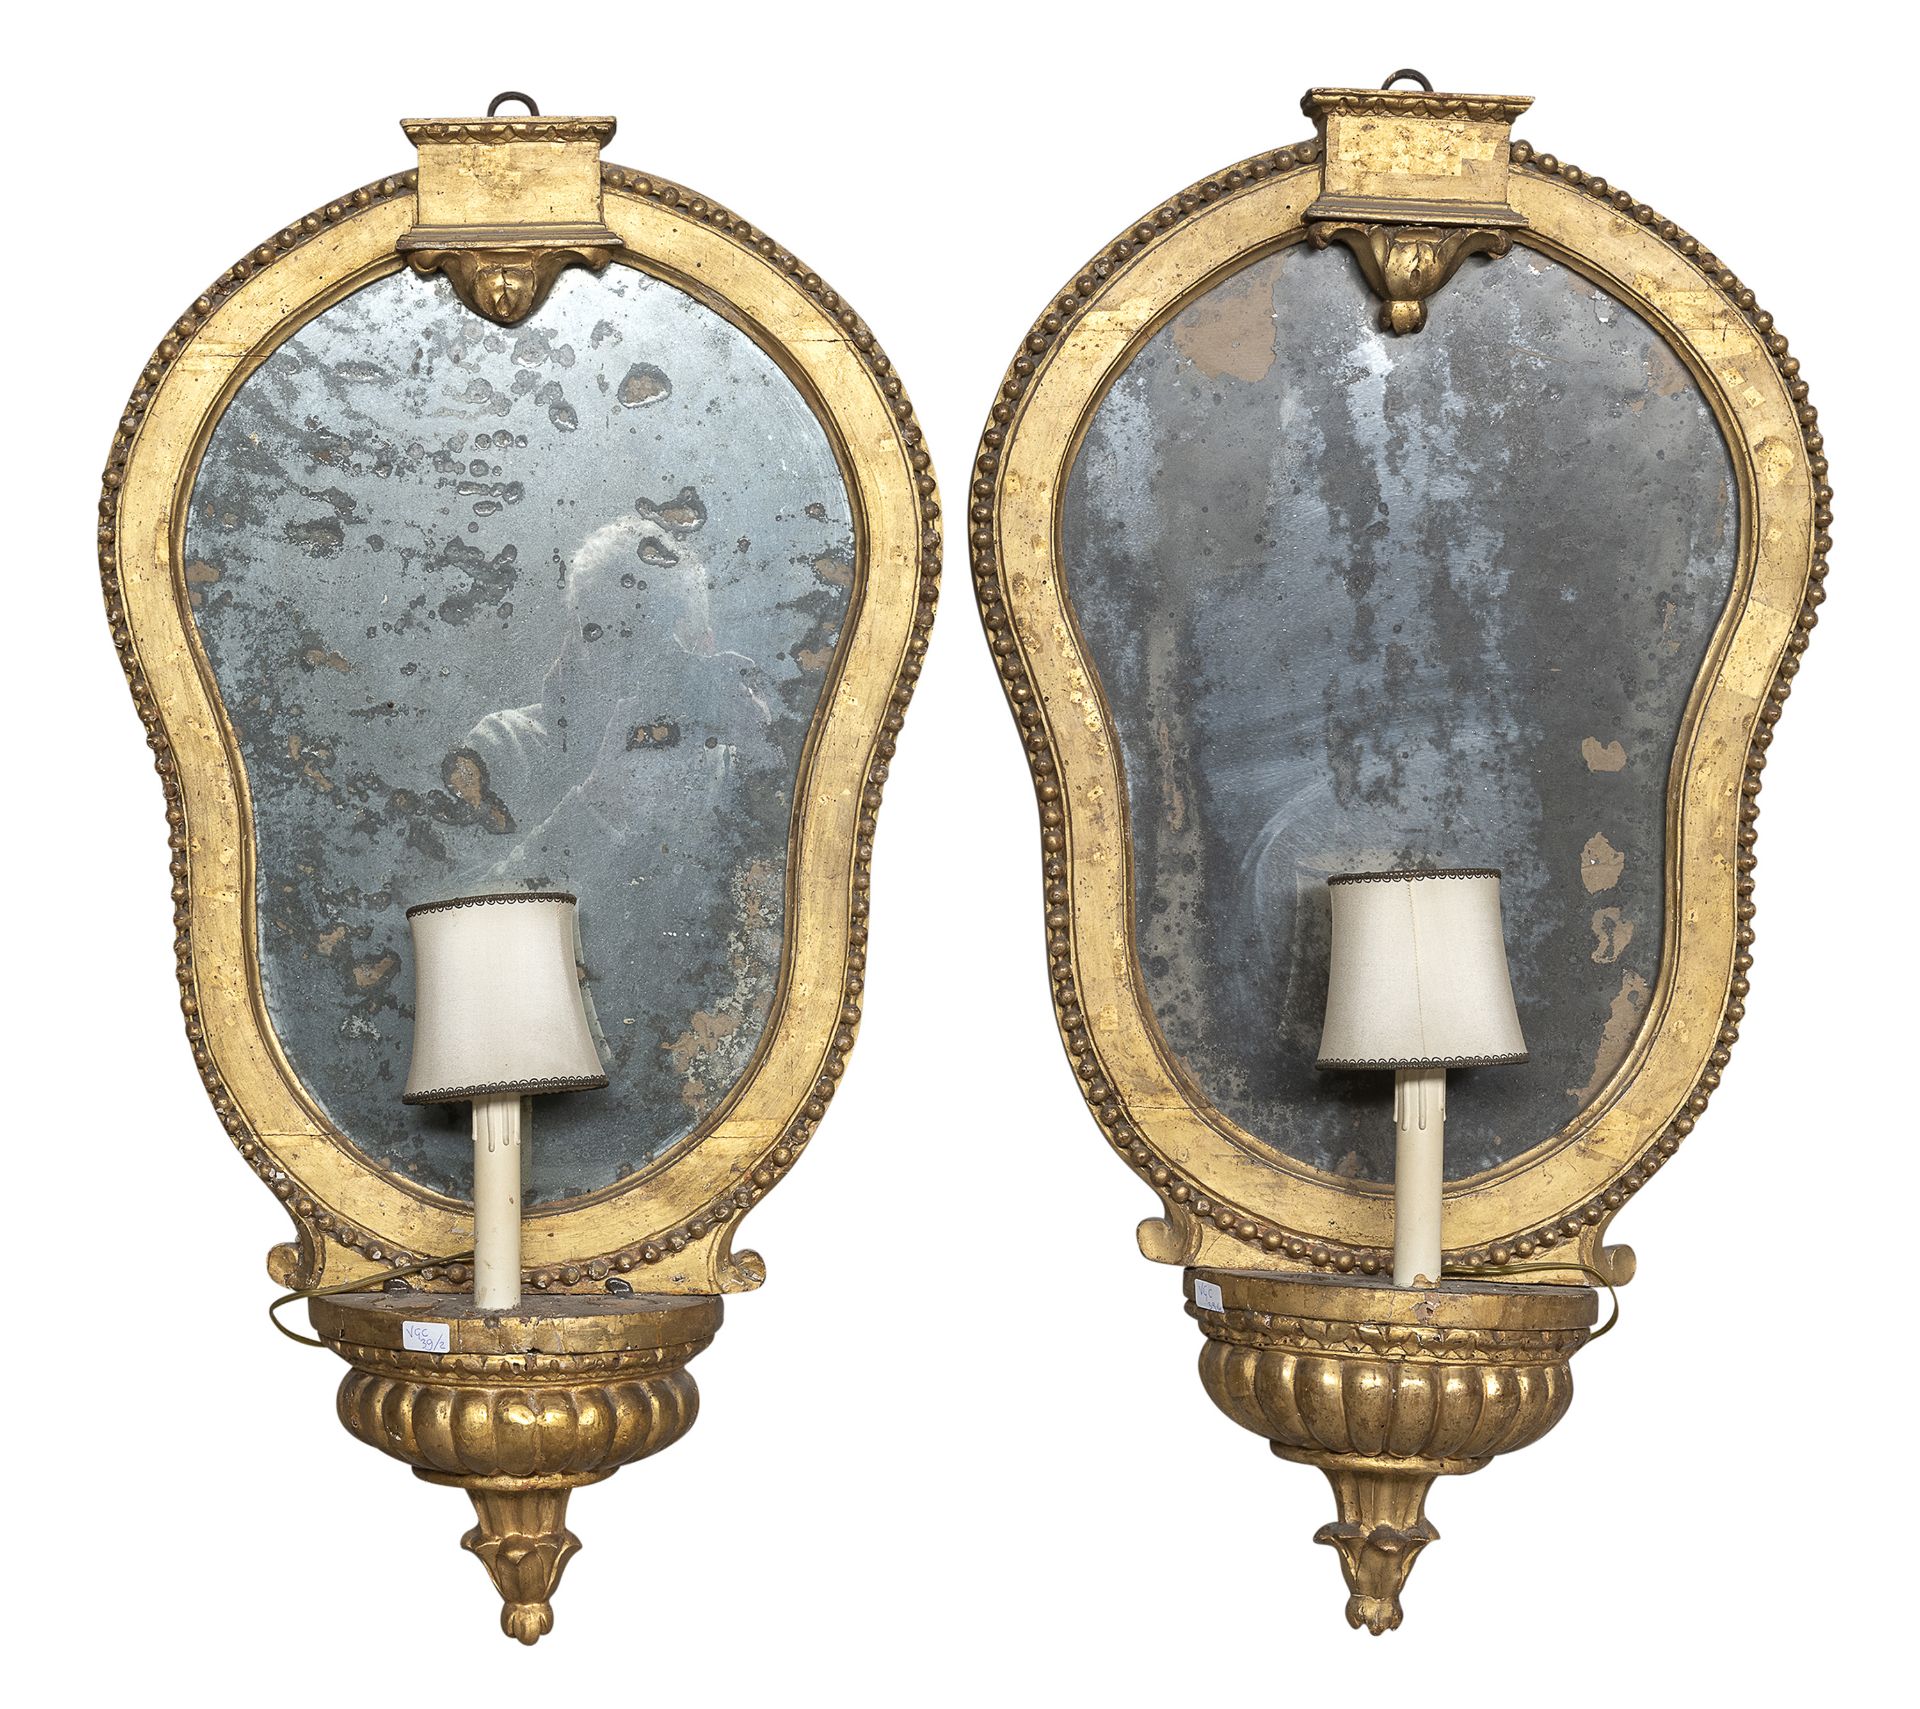 PAIR OF GILTWOOD MIRRORS PROBABLY ROME 18TH CENTURY